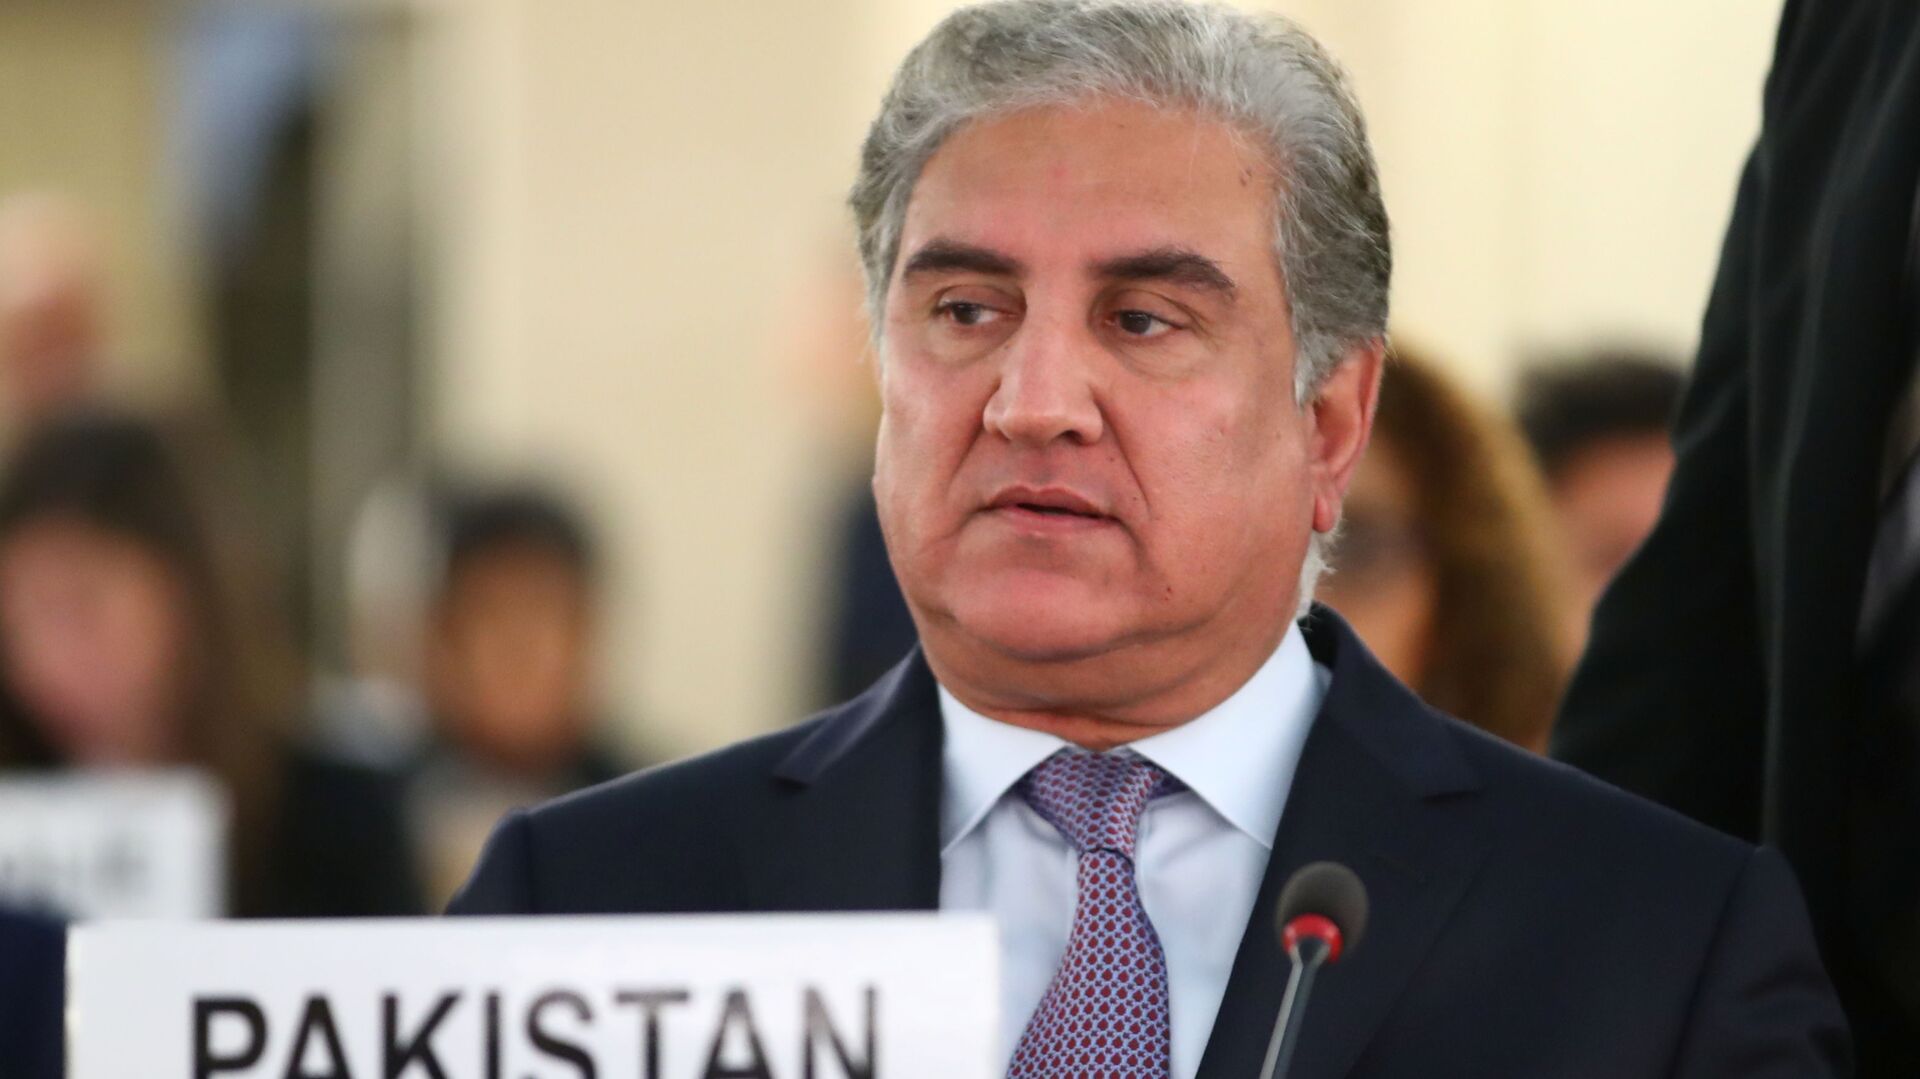 Pakistan foreign minister Shah Mehmood Qureshi arrives to address the United Nations Human Rights Council in Geneva, Switzerland, September 10, 2019 - اسپوتنیک افغانستان  , 1920, 29.11.2021